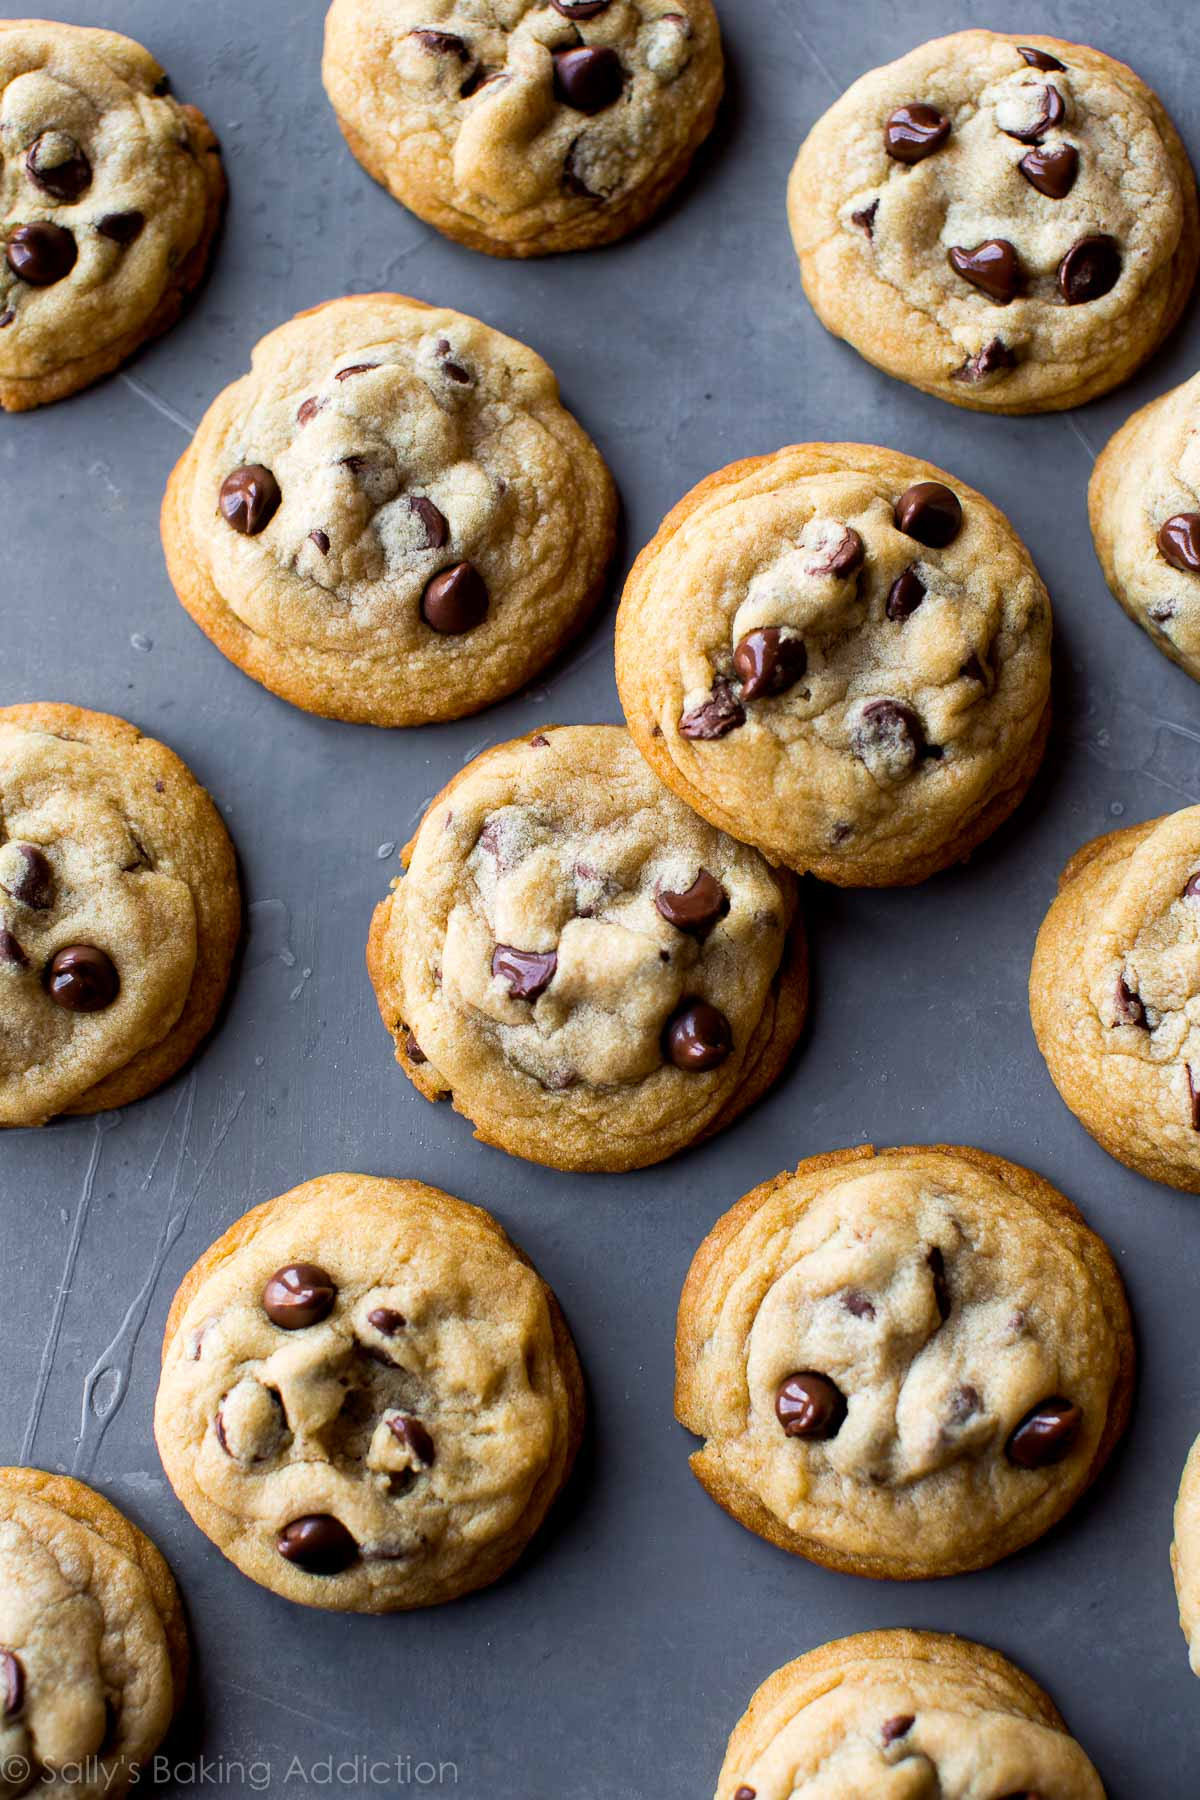 How To Bake Chocolate Chip Cookies
 The Best Soft Chocolate Chip Cookies Sallys Baking Addiction